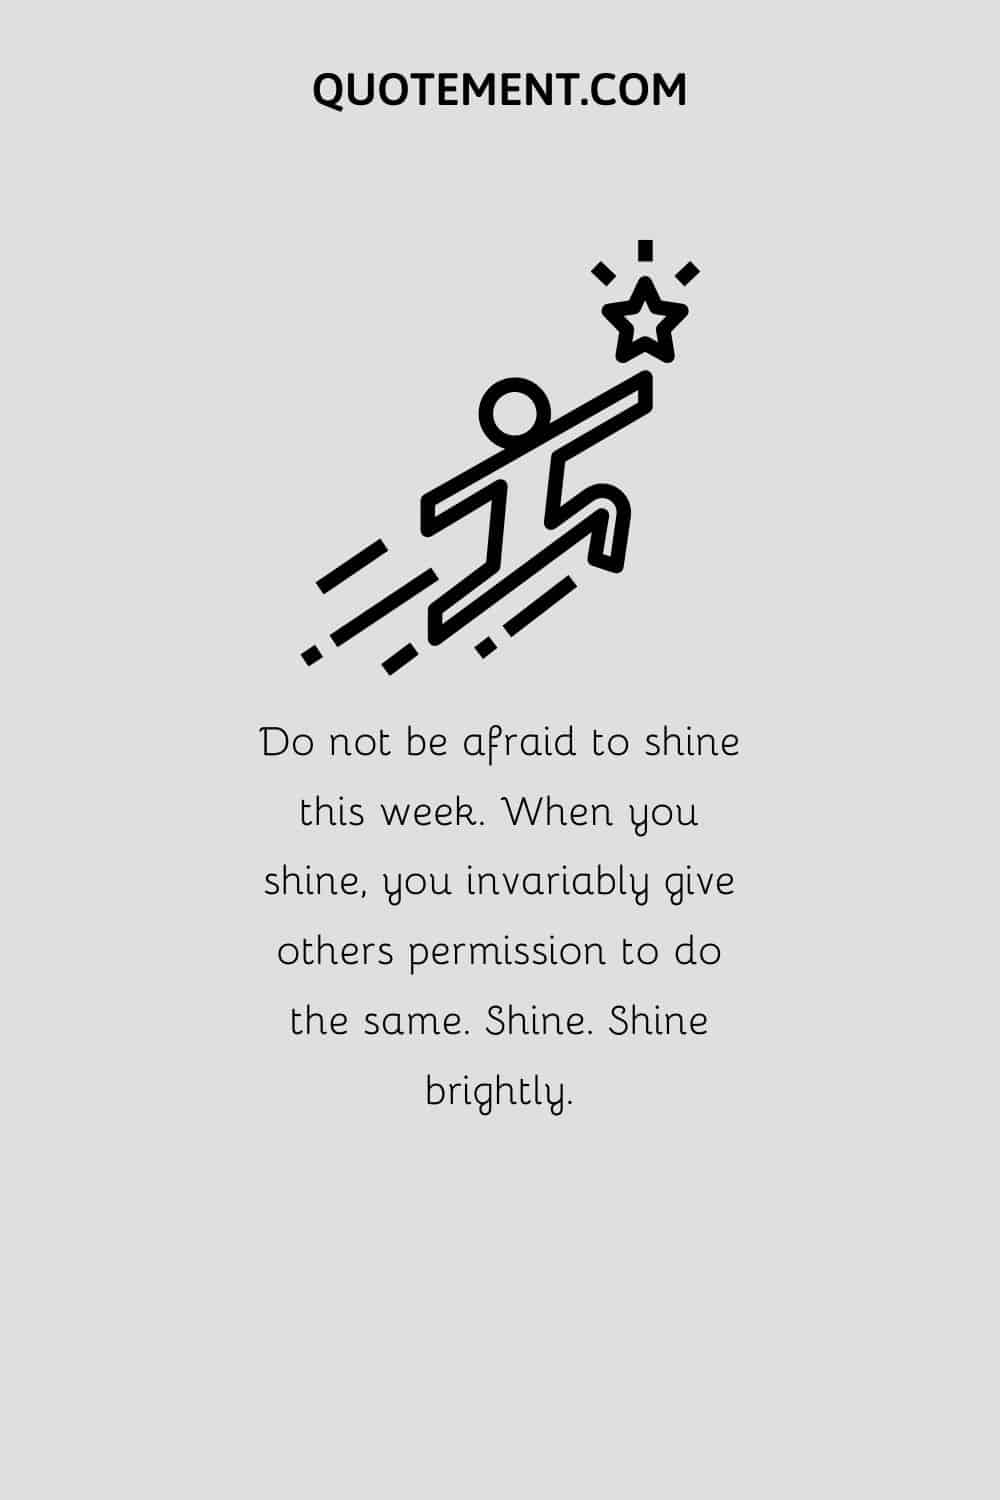 Do not be afraid to shine this week